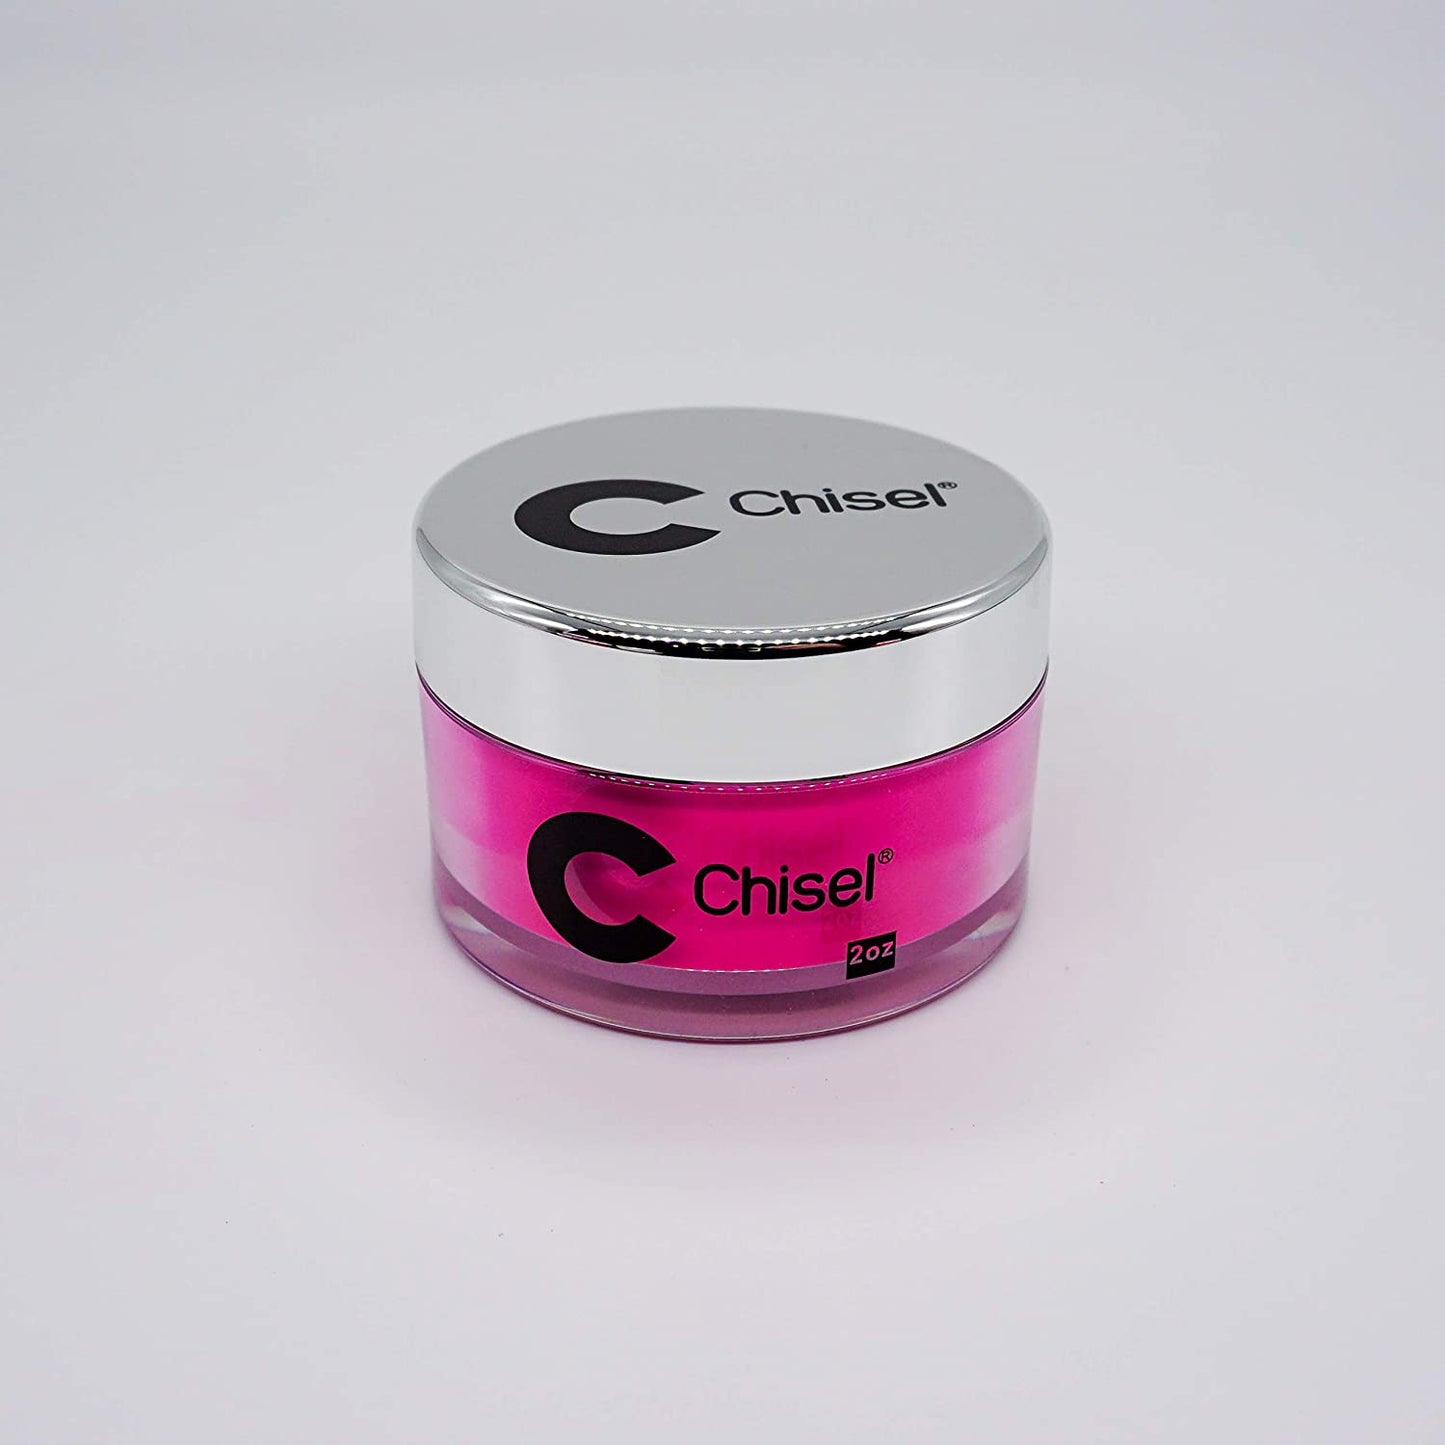 Chisel Nail Art 2 in 1 Acrylic & Dipping Powder Solid #011